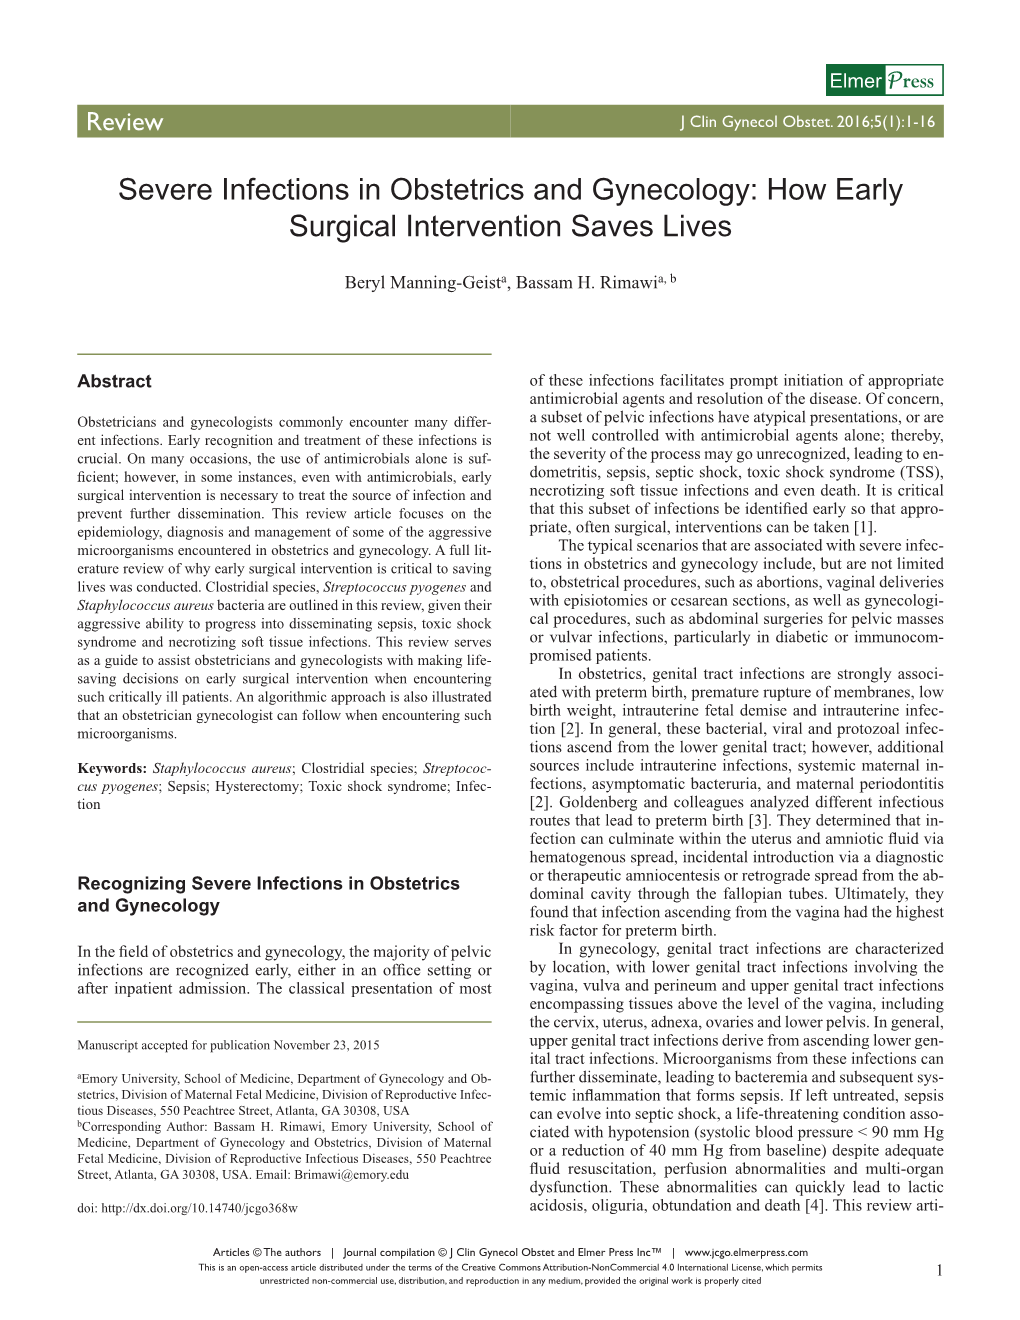 Severe Infections in Obstetrics and Gynecology: How Early Surgical Intervention Saves Lives